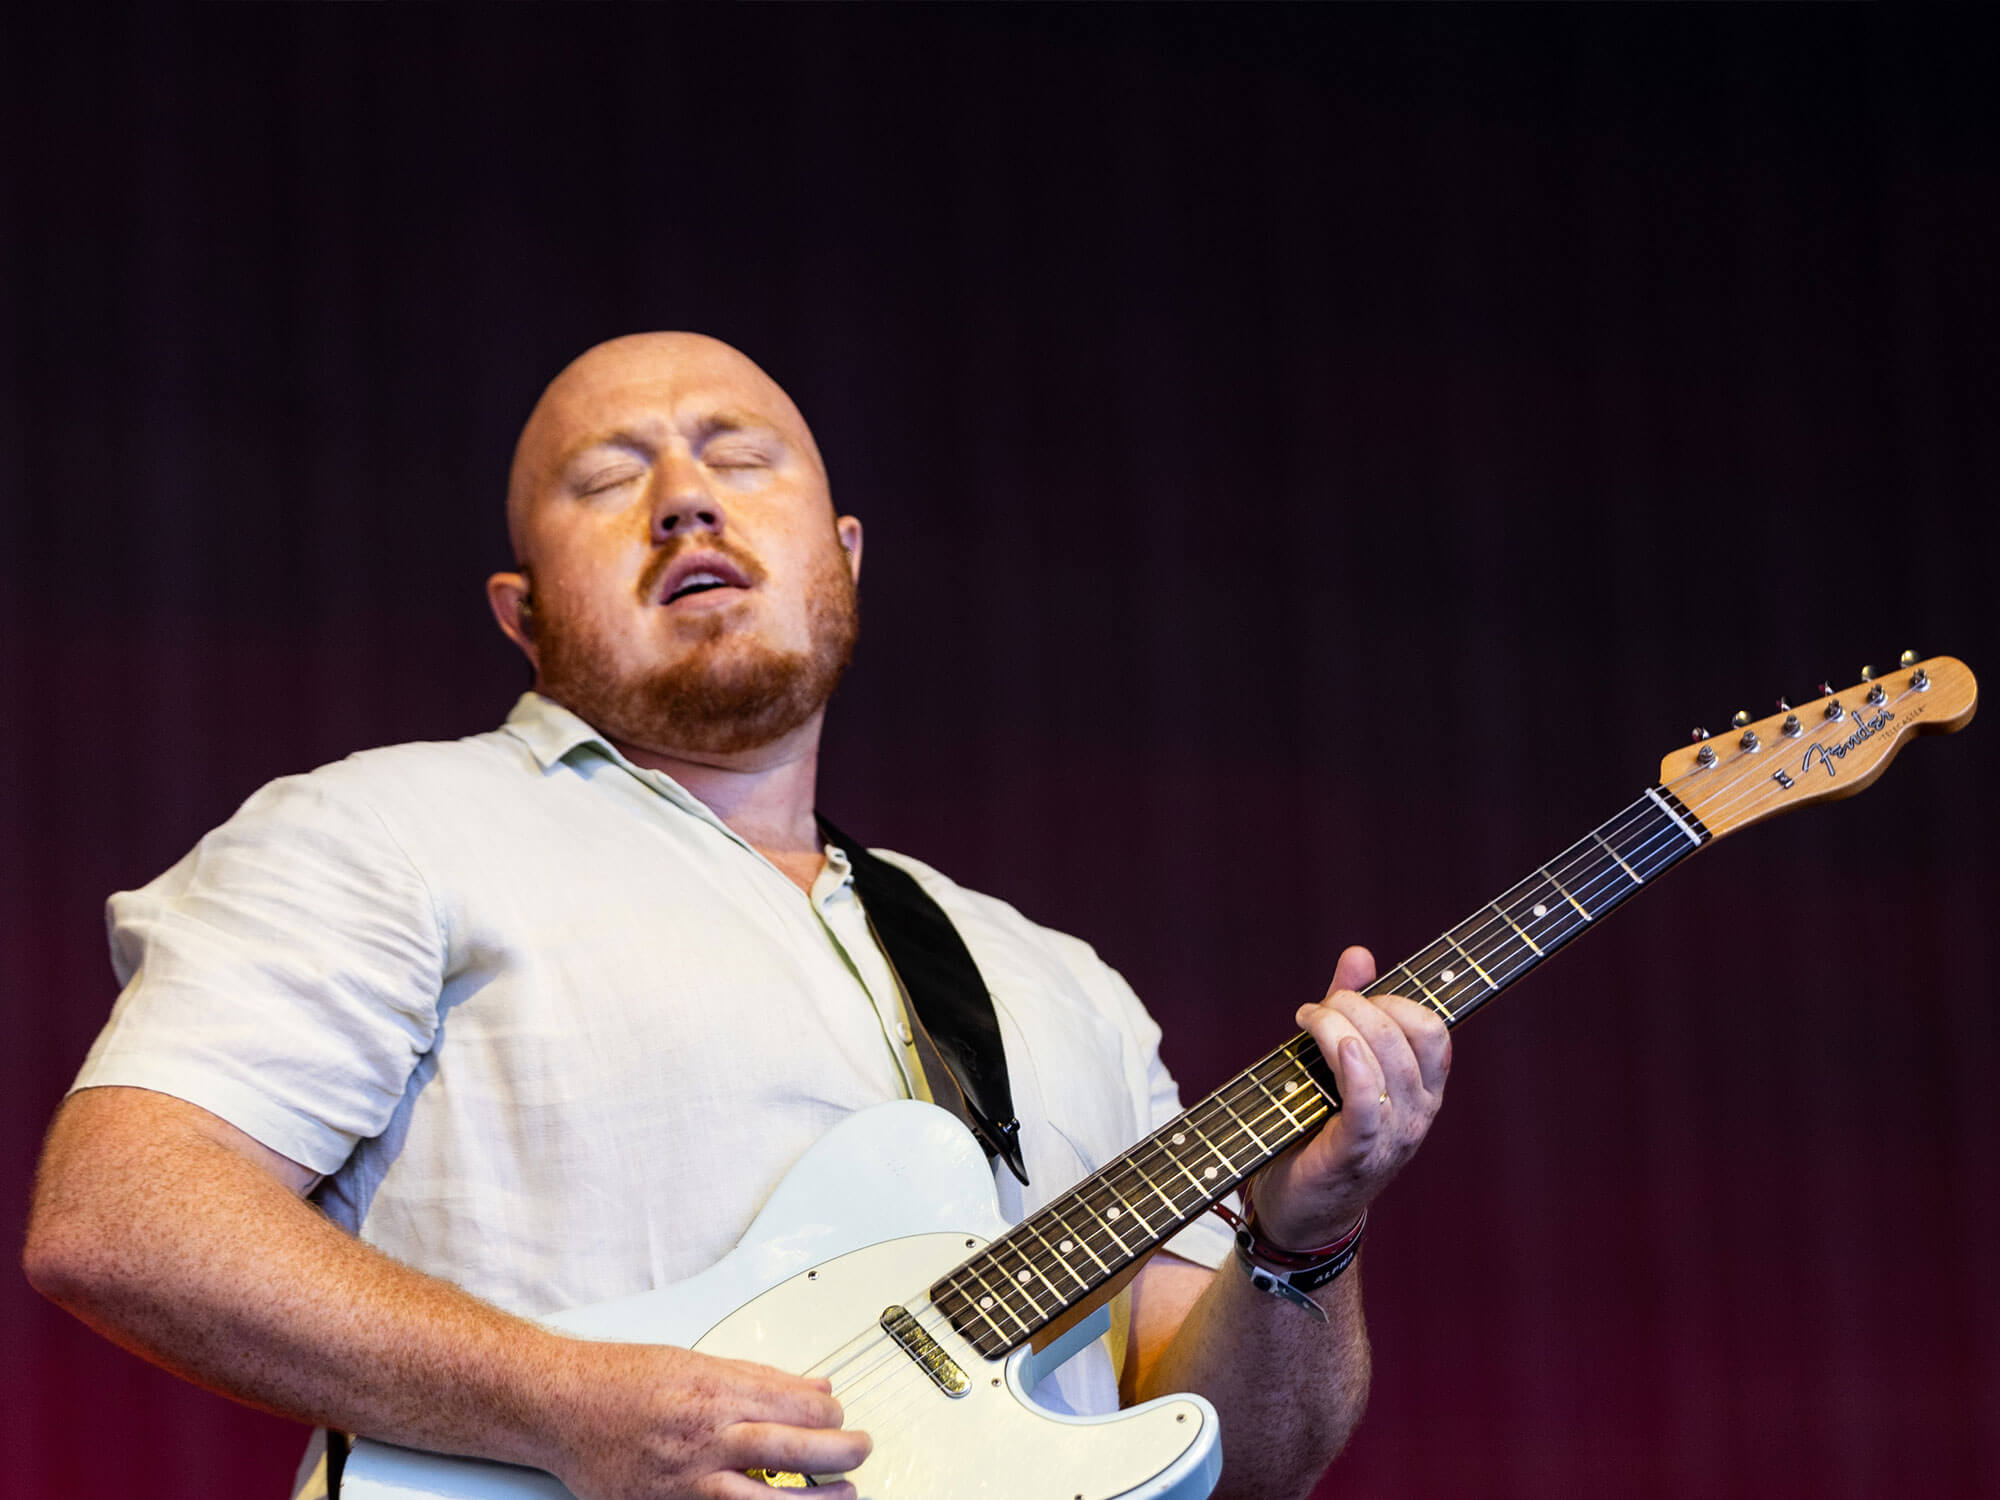 Jamie MacColl of Bombay Bicycle Club performs at Lowlands Festival 2023